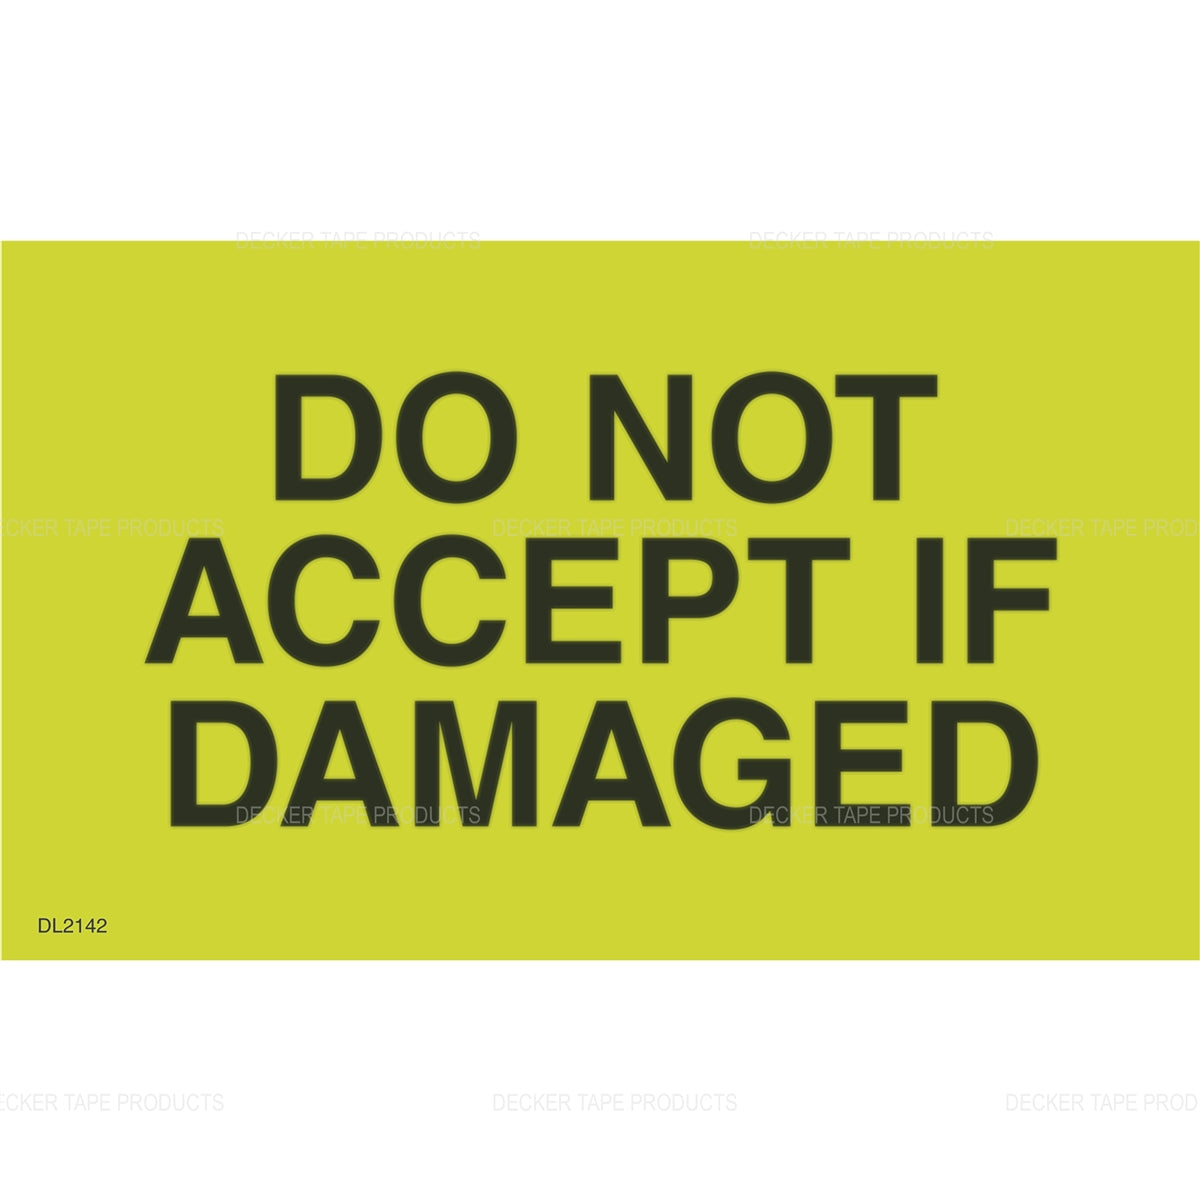 "Do Not Accept if Damaged" Label